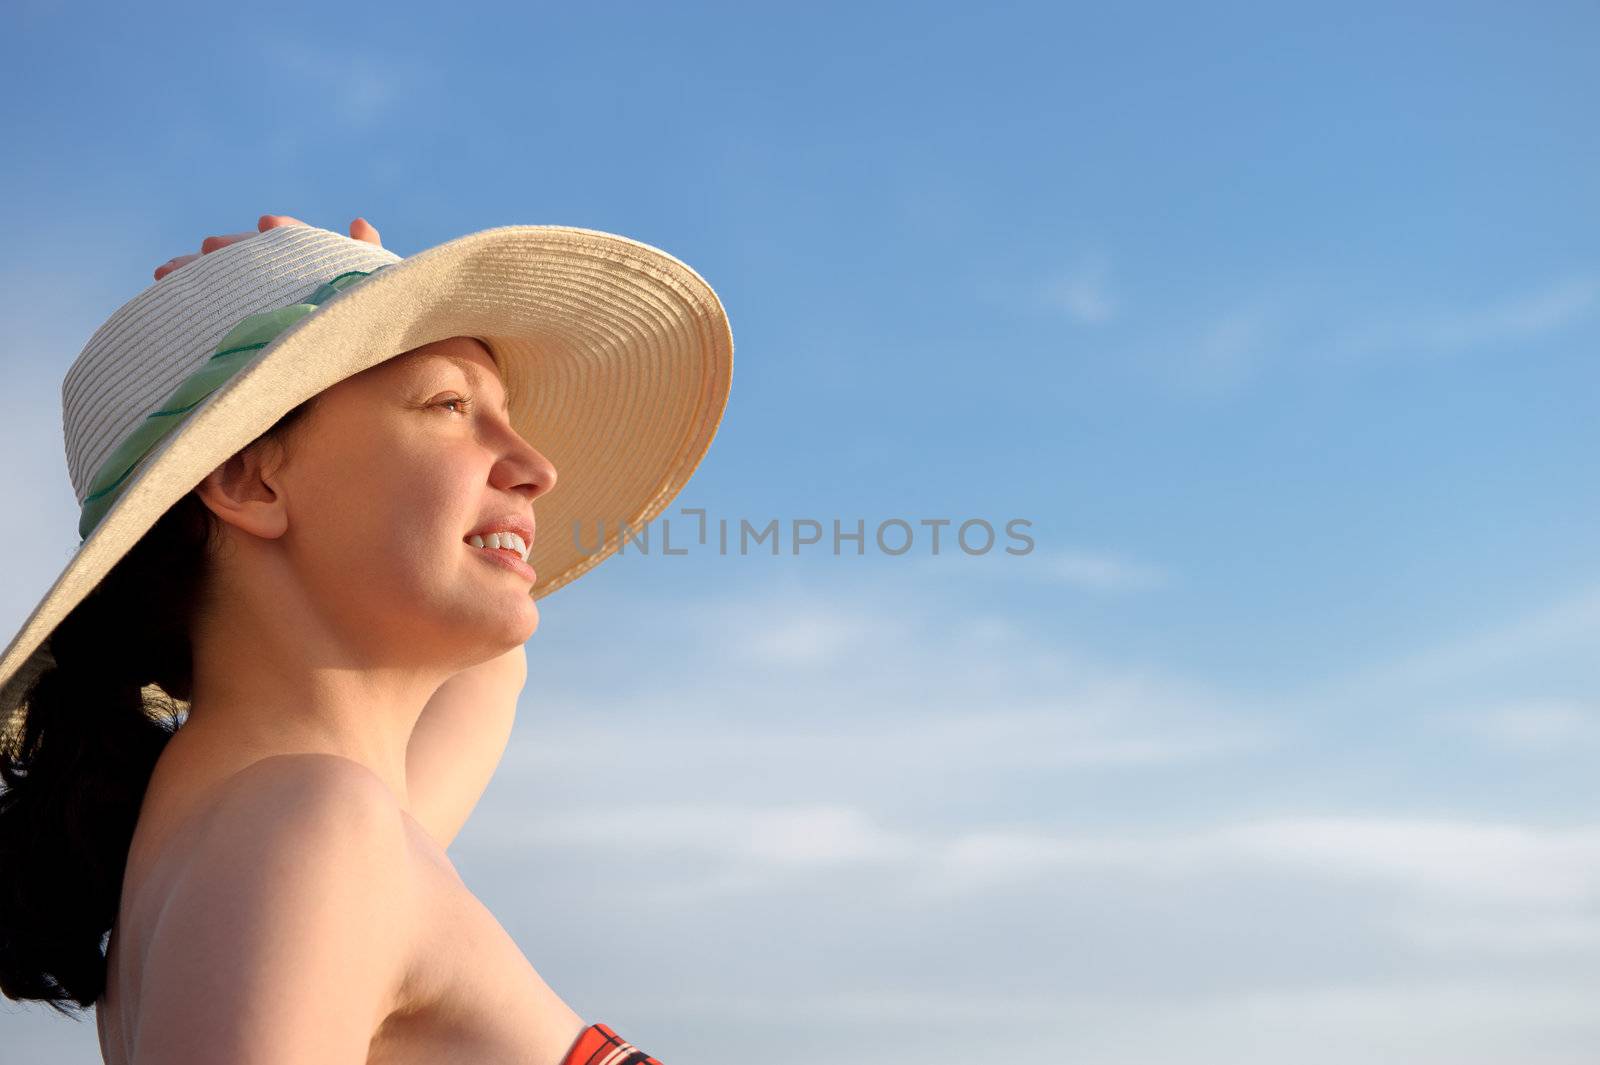 The girl in a hat against the blue sky by galdzer